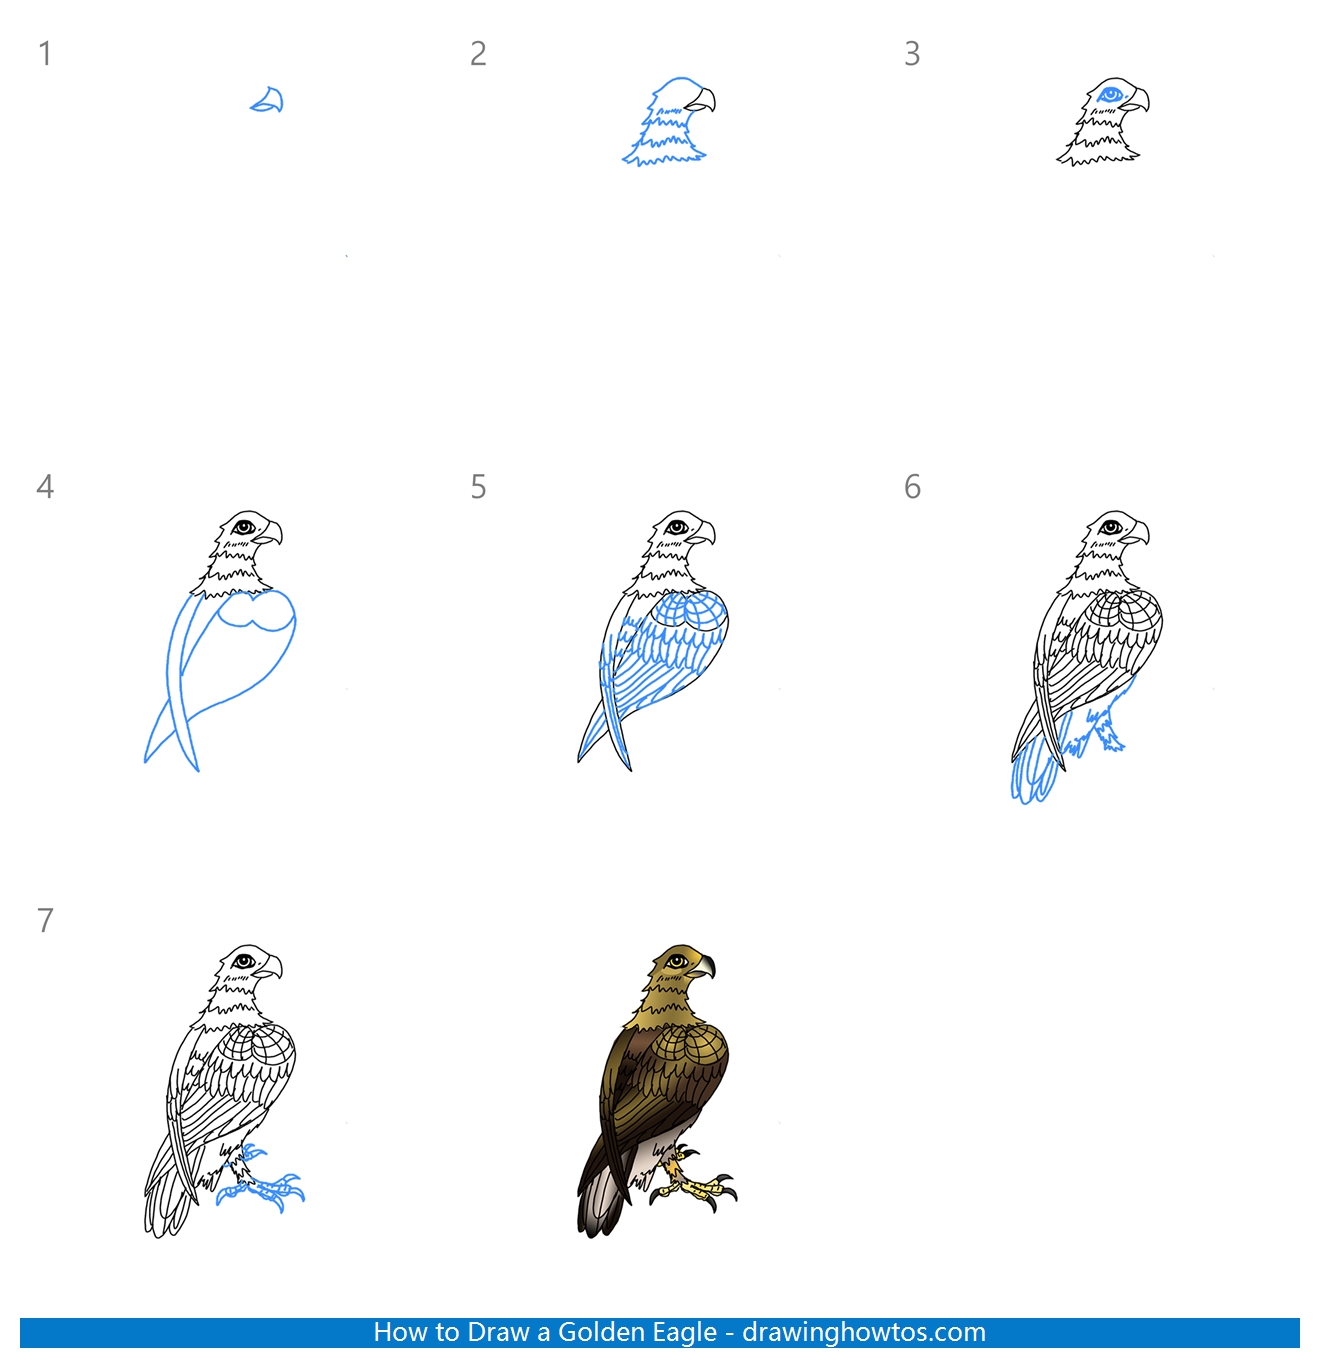 How to Draw a Golden Eagle Step by Step